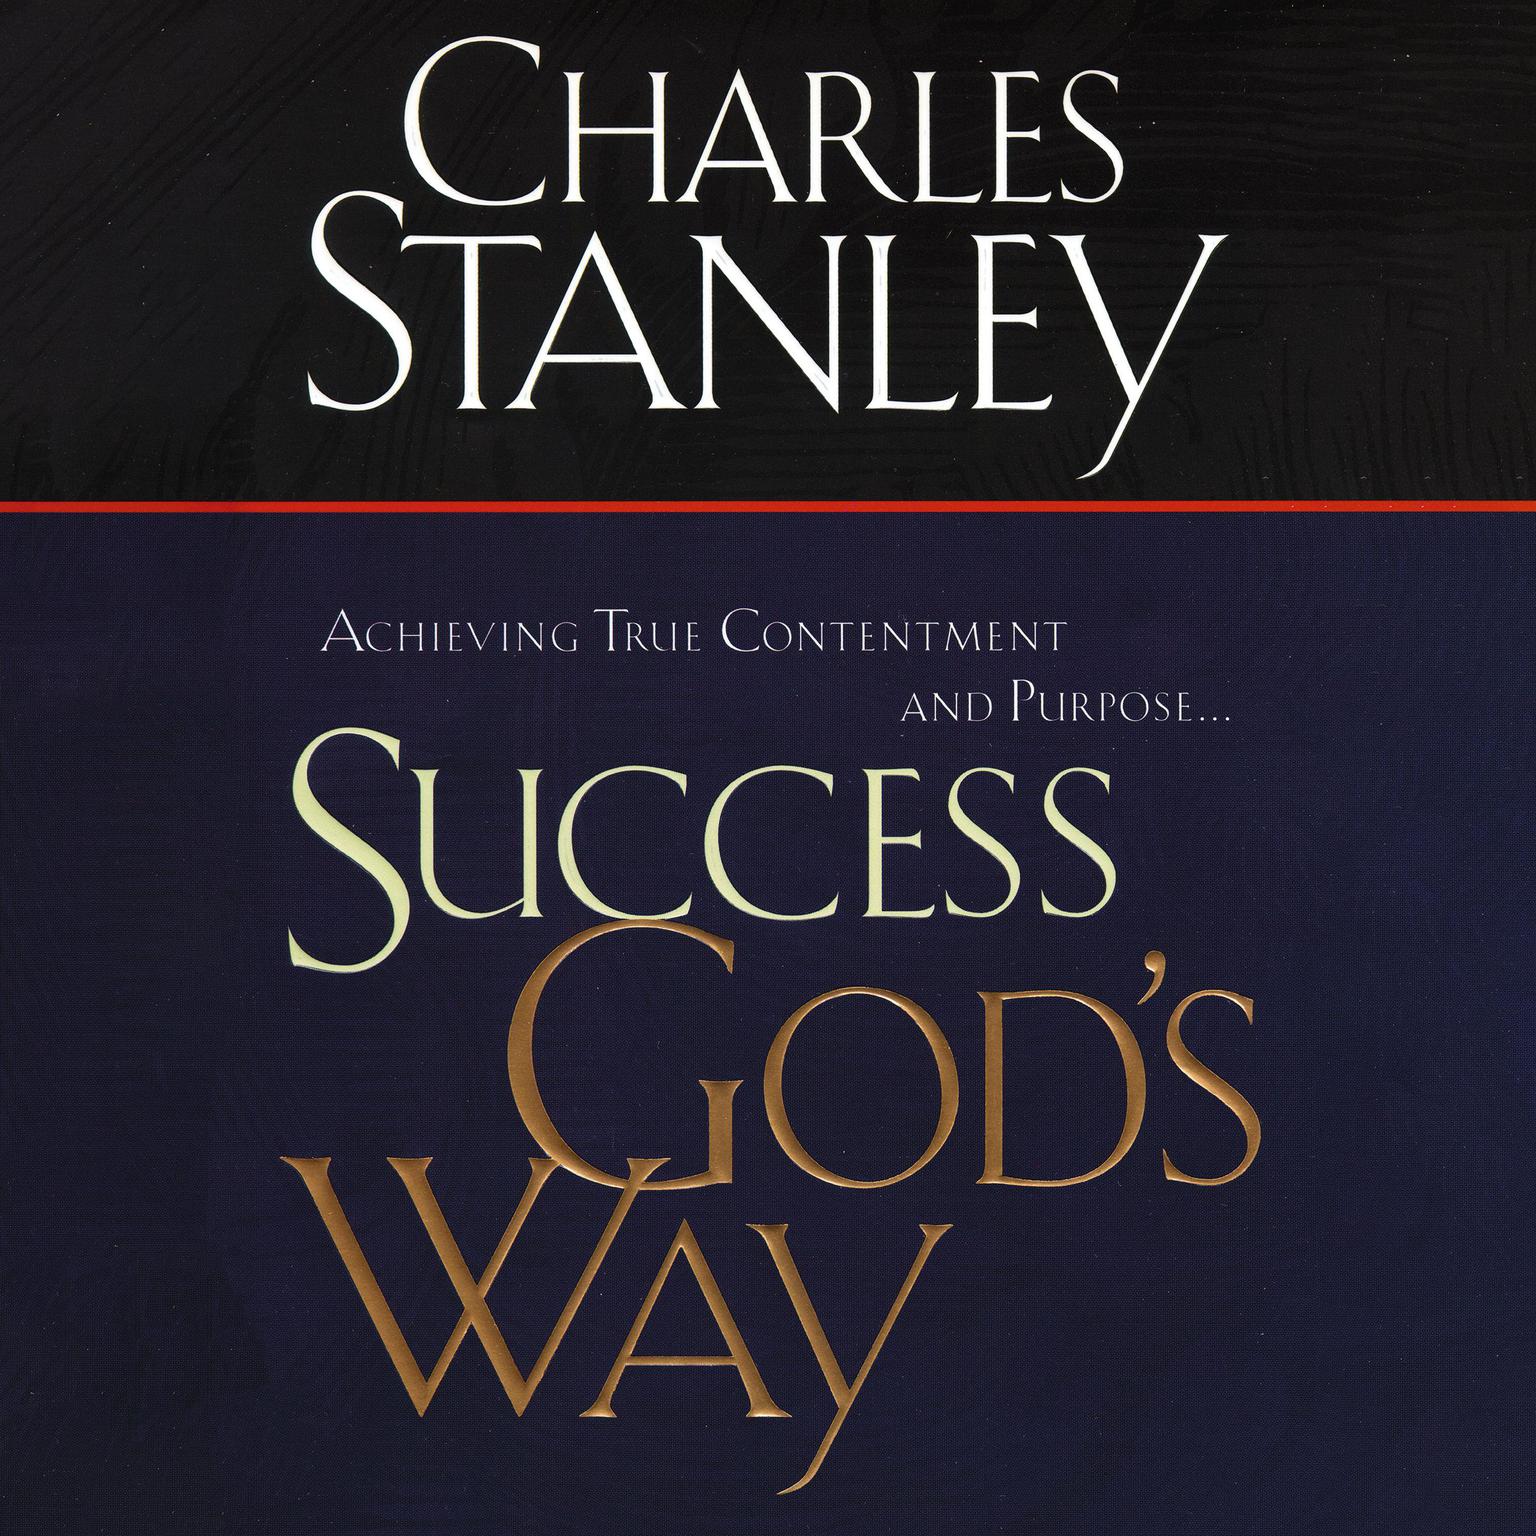 Success Gods Way (Abridged): Achieving True Contentment and Purpose Audiobook, by Charles F. Stanley